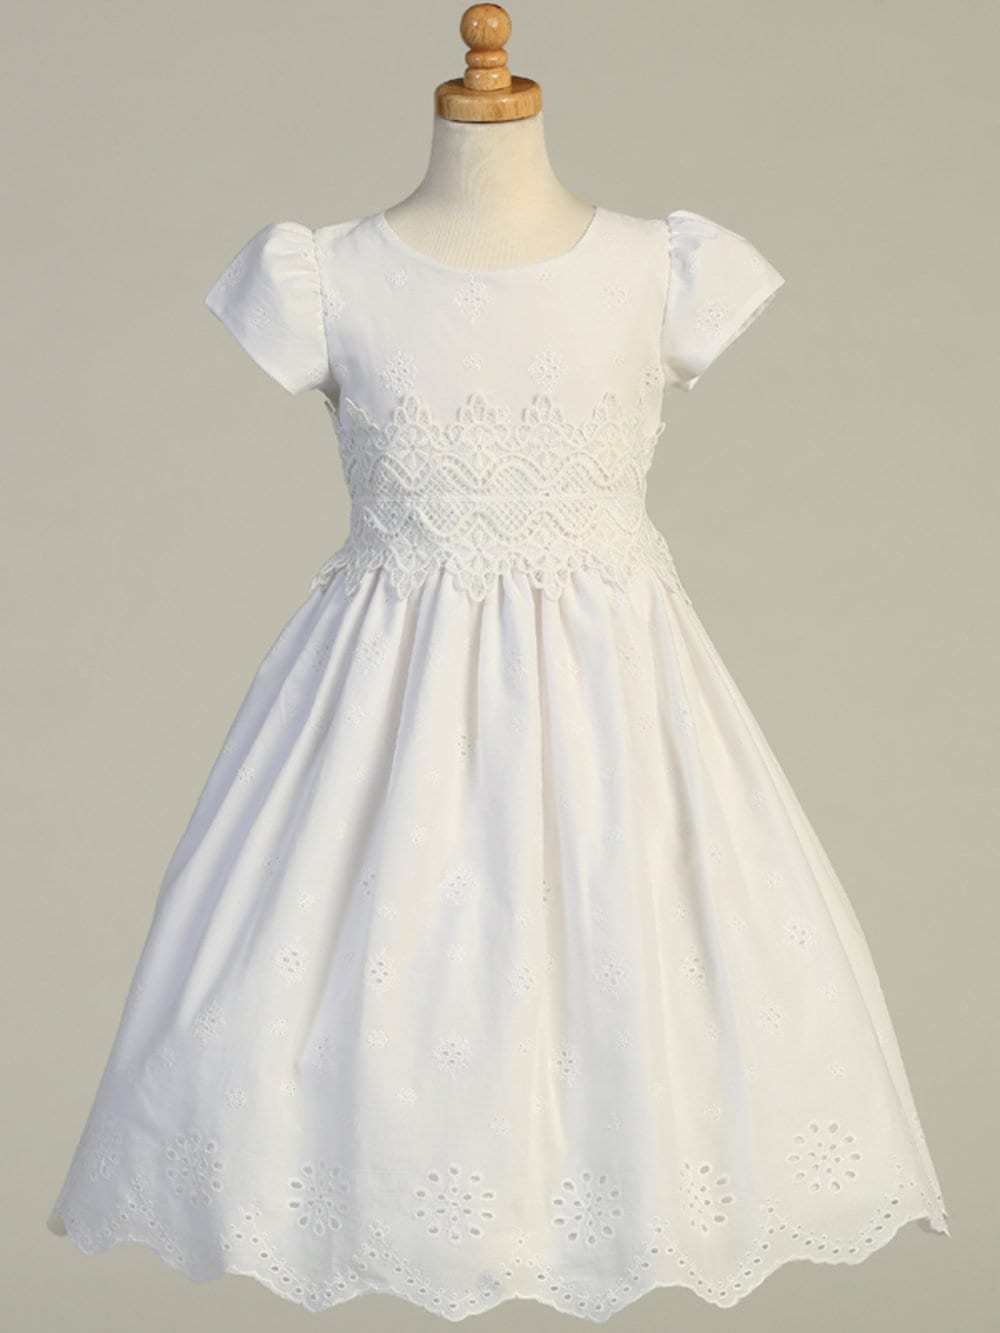 A full-length view of the First Communion Dress showing the elegant silhouette and cotton eyelet fabric.